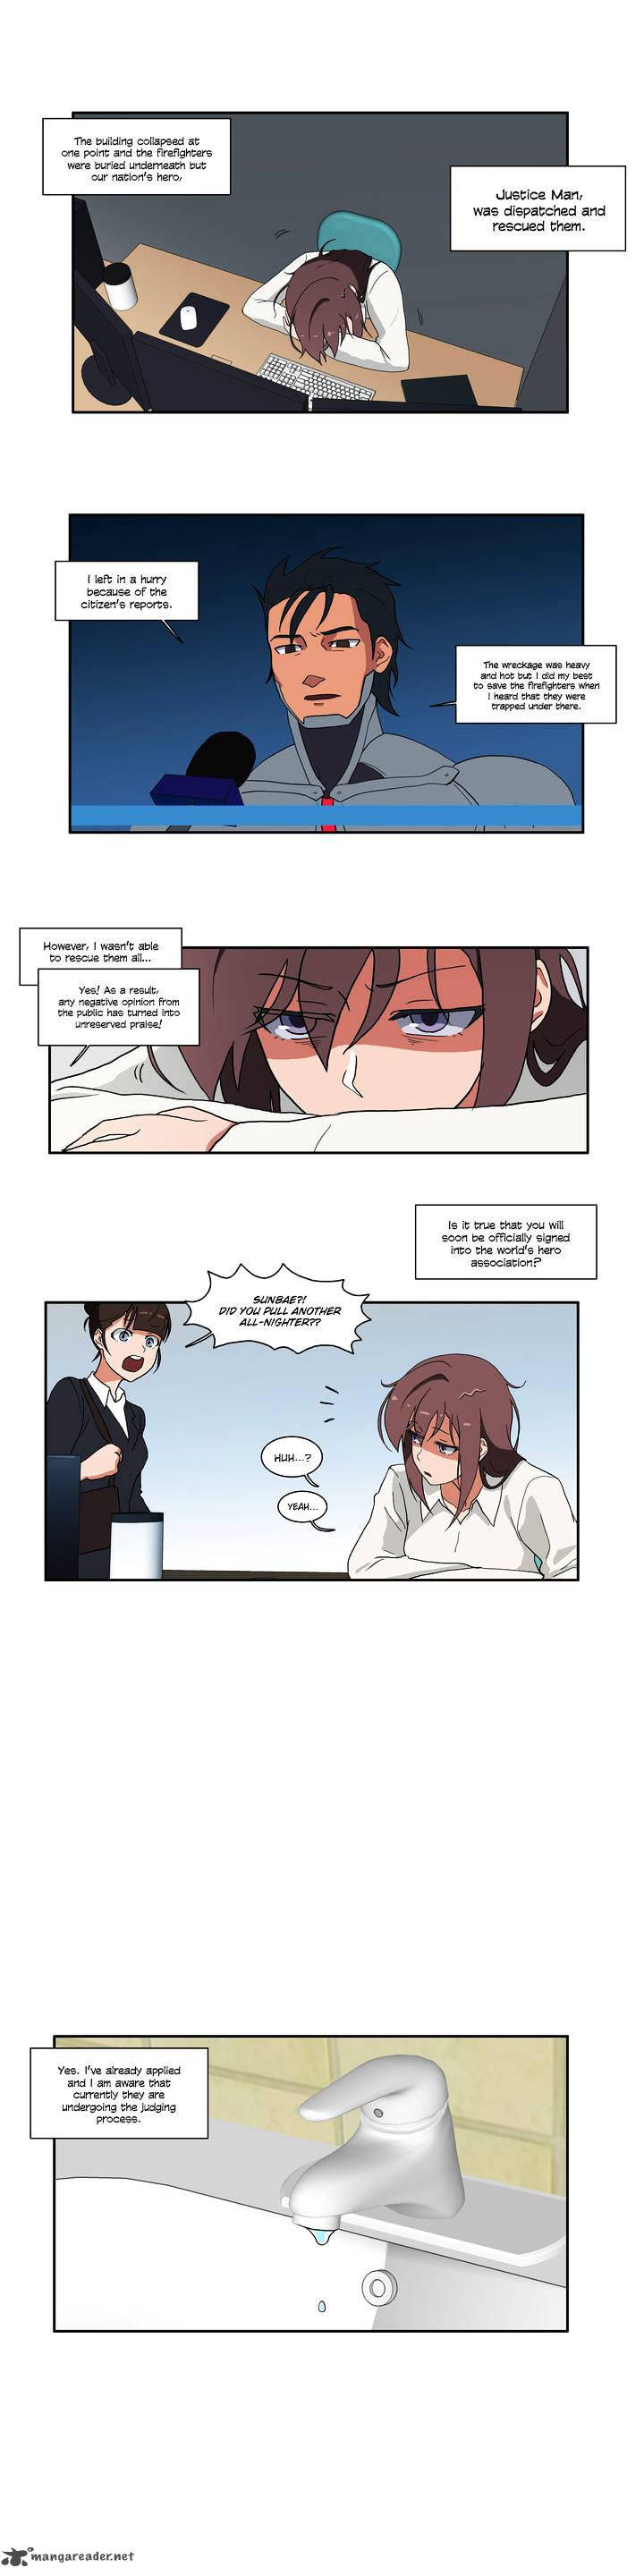 Hero Waltz Chapter 41 Page 4